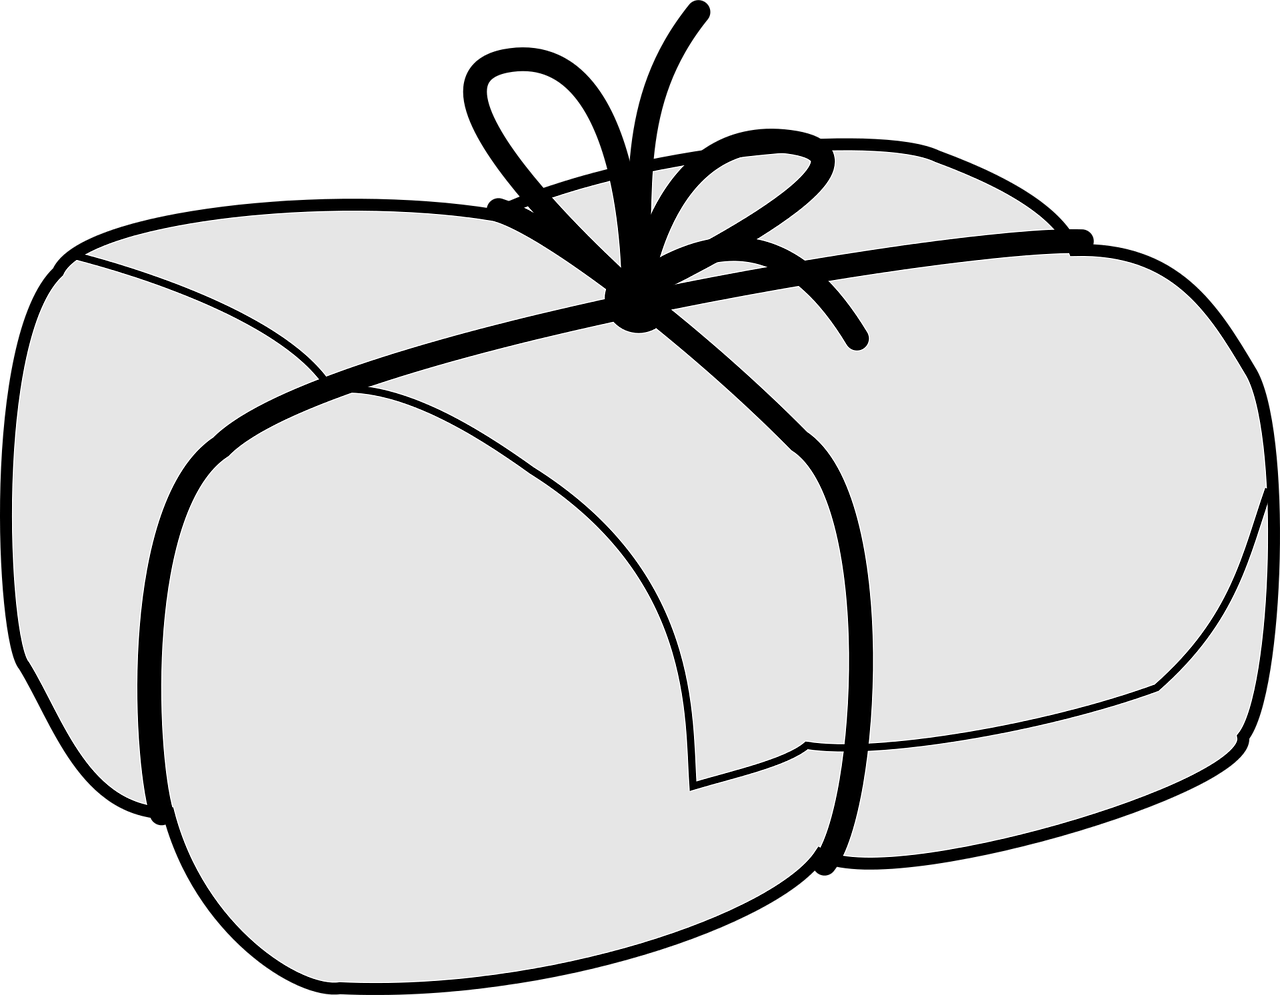 a black and white picture of a wrapped present, lineart, inspired by Shūbun Tenshō, reddit, minimalism, steamed buns, white pillows, digitally colored, cartoon network stillframe